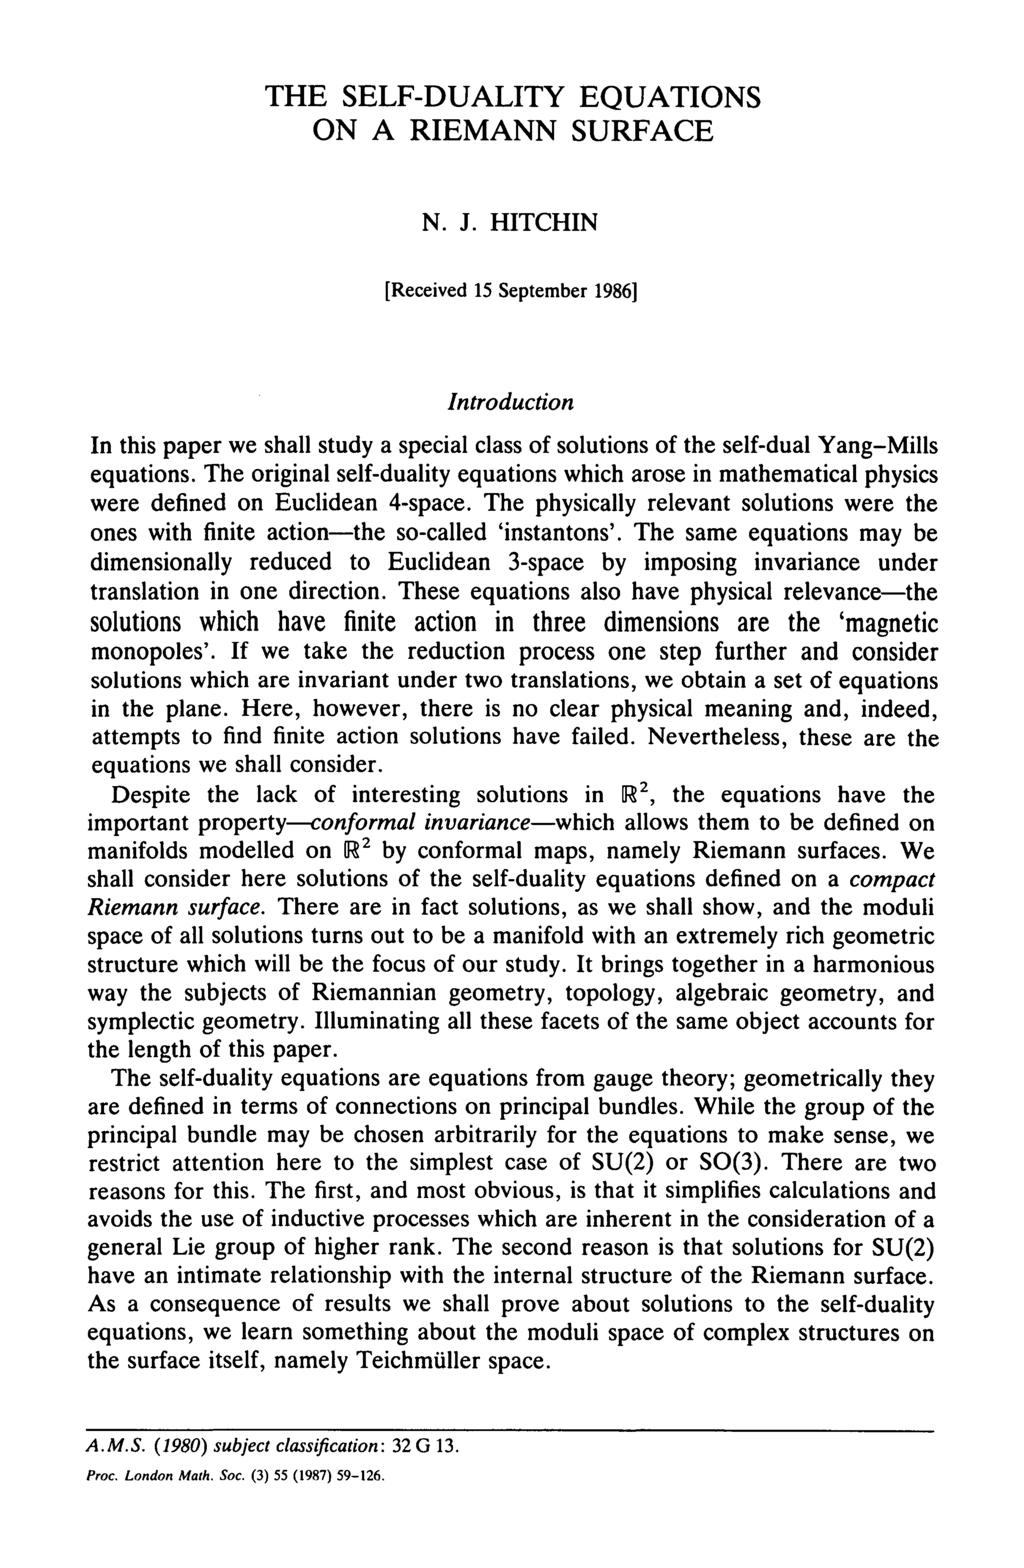 THE SELF-DUALITY EQUATIONS ON A RIEMANN SURFACE N. J. HITCHIN [Received 15 September 1986] Introduction In this paper we shall study a special class of solutions of the self-dual Yang-Mills equations.